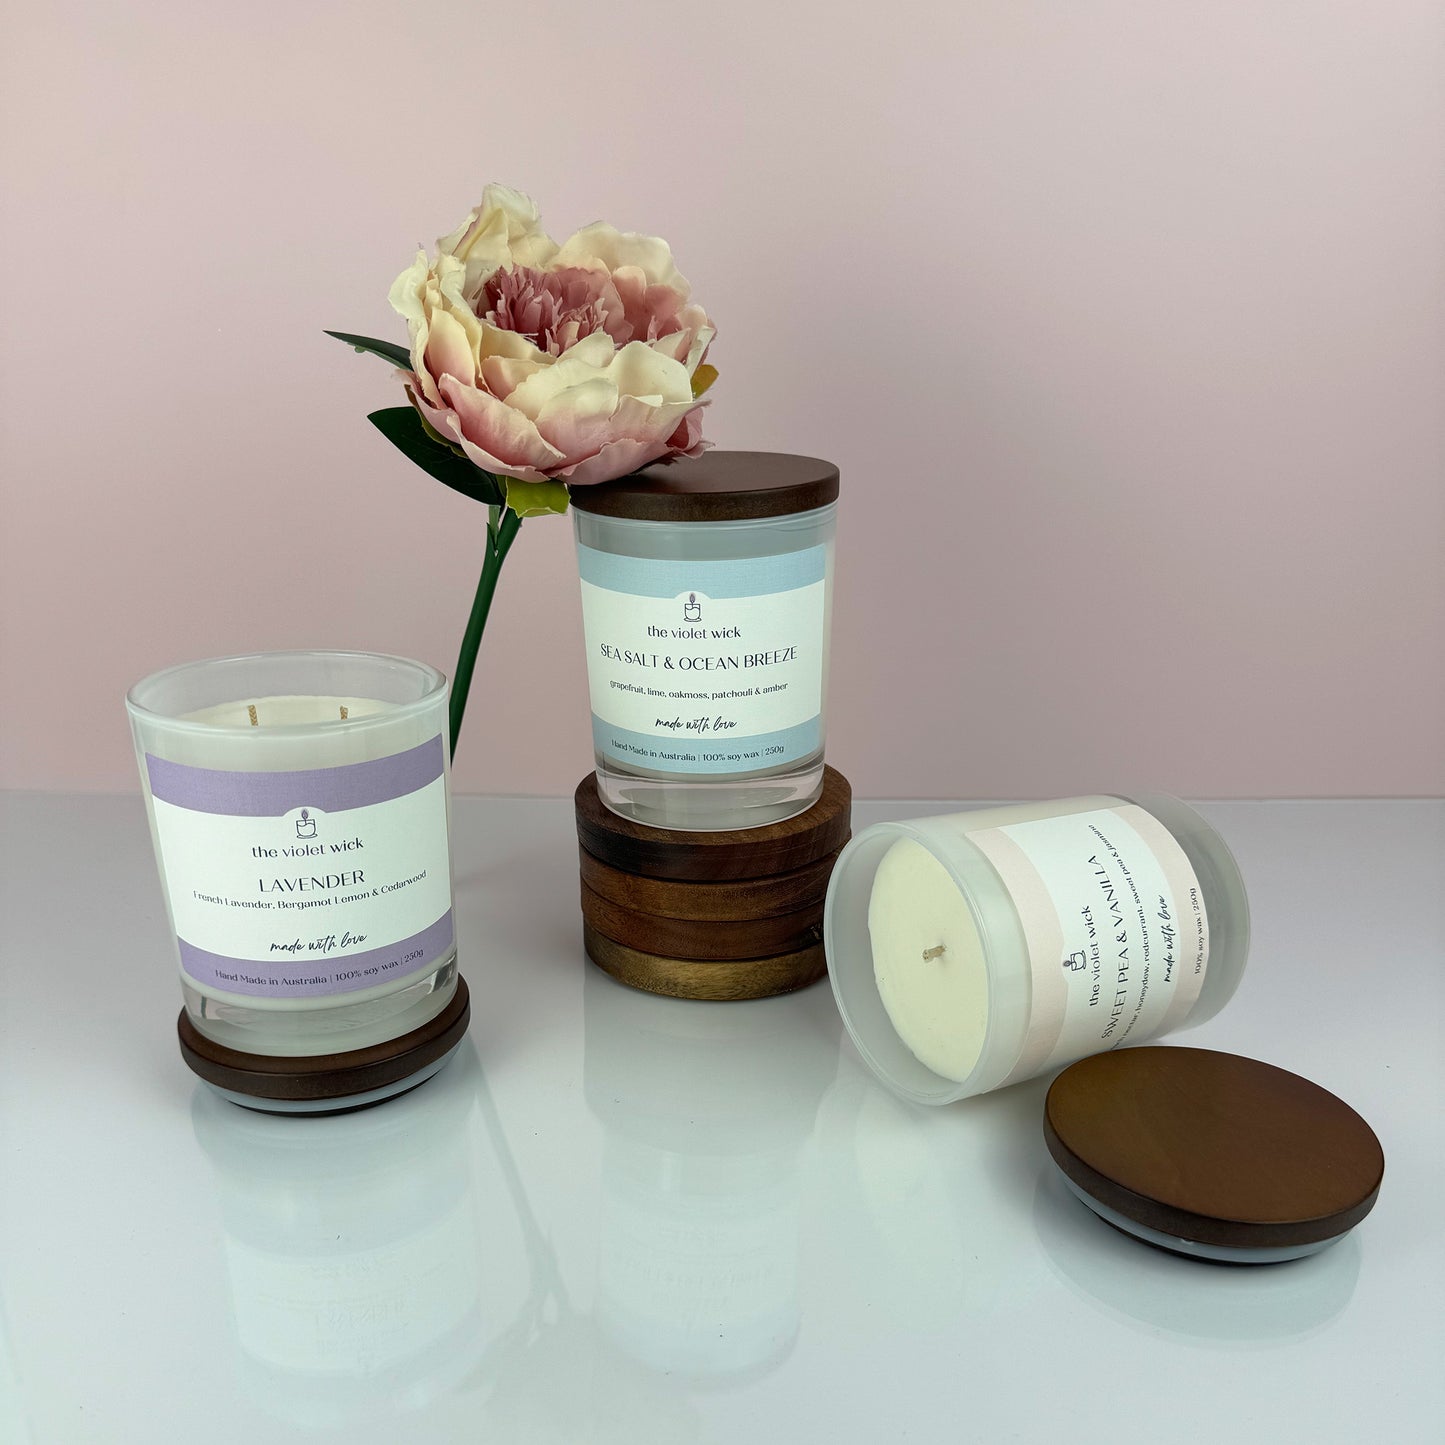 Your Choice soy candle bundle from The Violet Wick, three scented soy candles in glass jar and timber lid, 250g each.